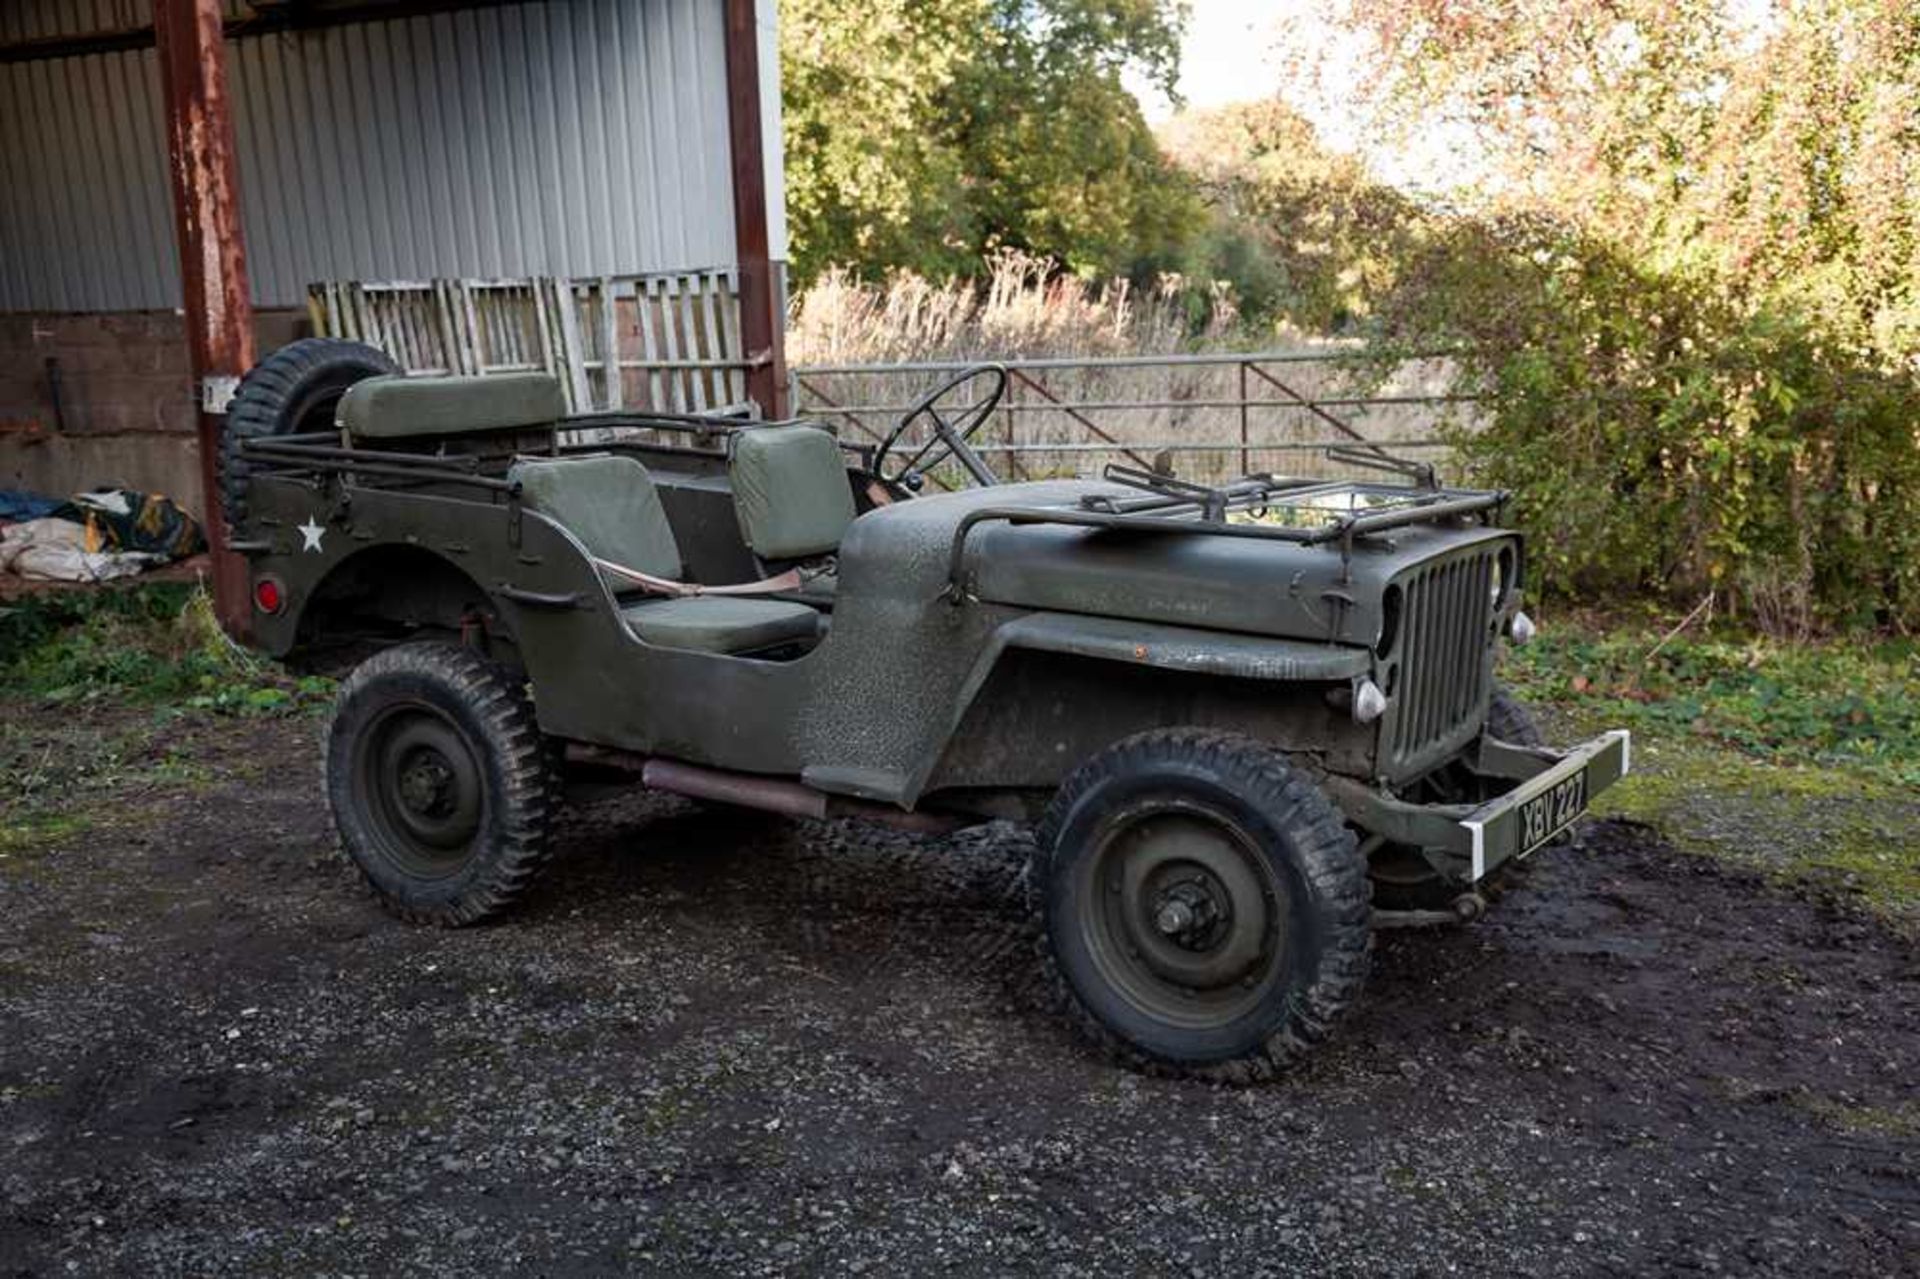 1943 Ford GPW Jeep Formerly the Property of Oscar Winner Rex Harrison - Image 61 of 88